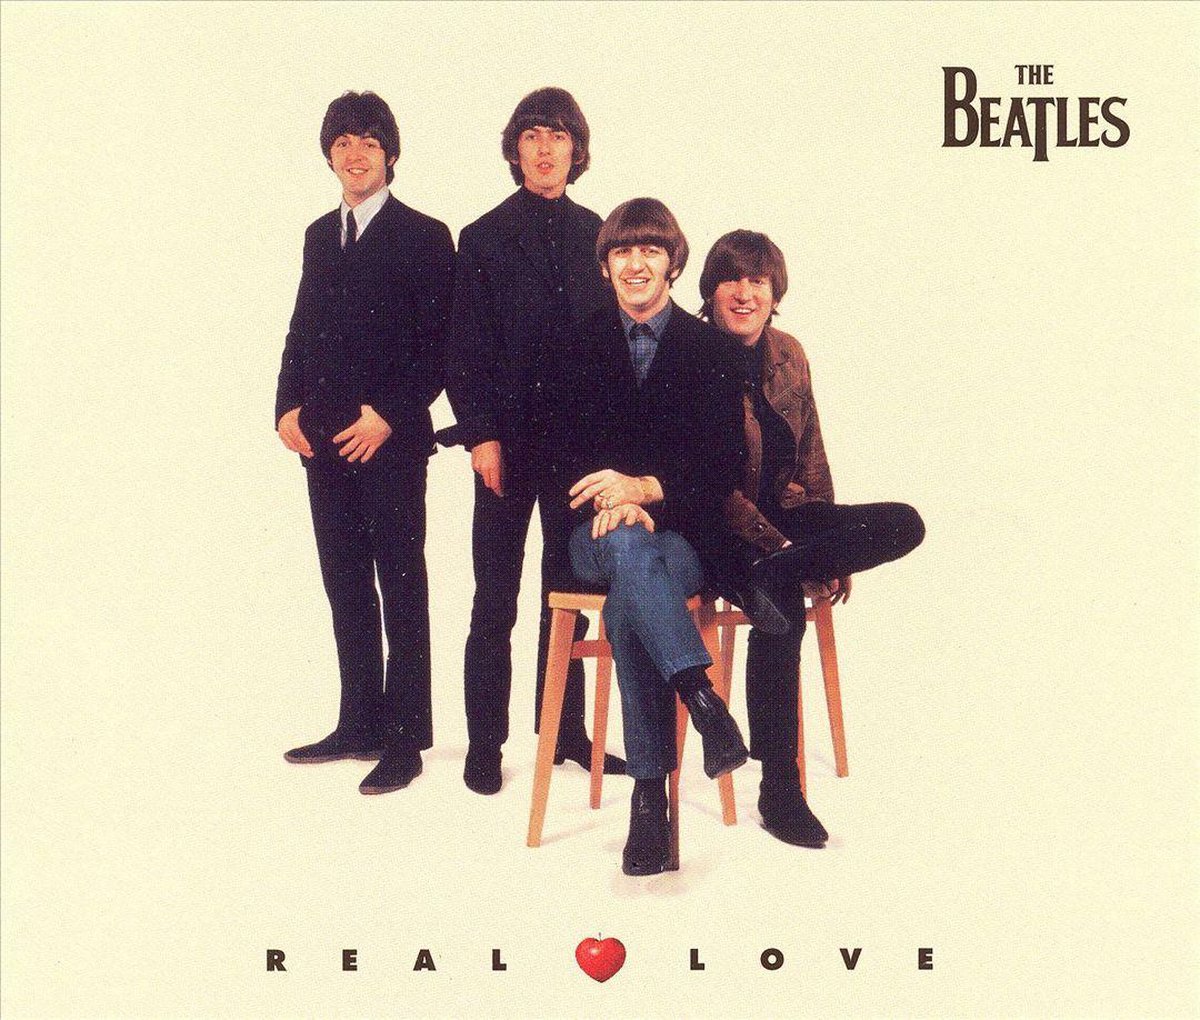 The Beatles - Real Love (1996) (single)